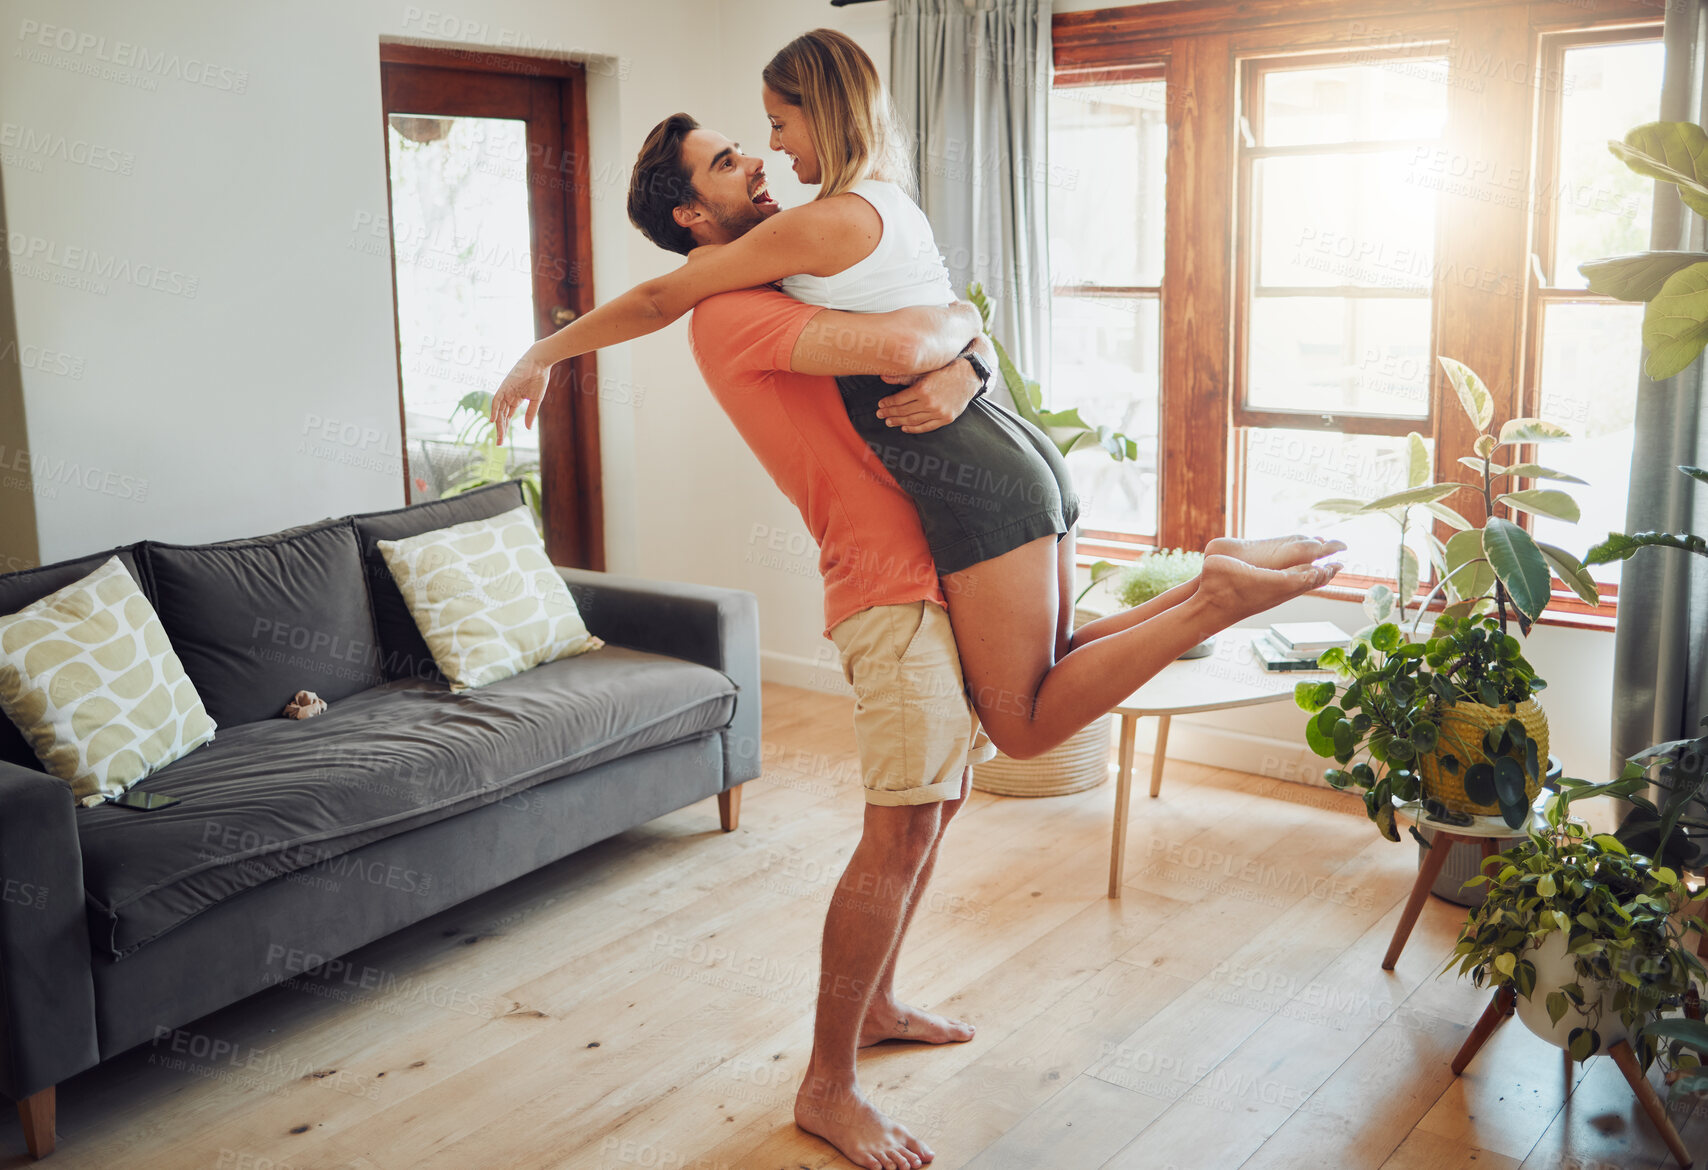 Buy stock photo Happy young boyfriend holding girlfriend in arms as he lifts her up while they look into each others eyes and share intimate moment. Romantic young couple hugging and enjoying passionate dance at home